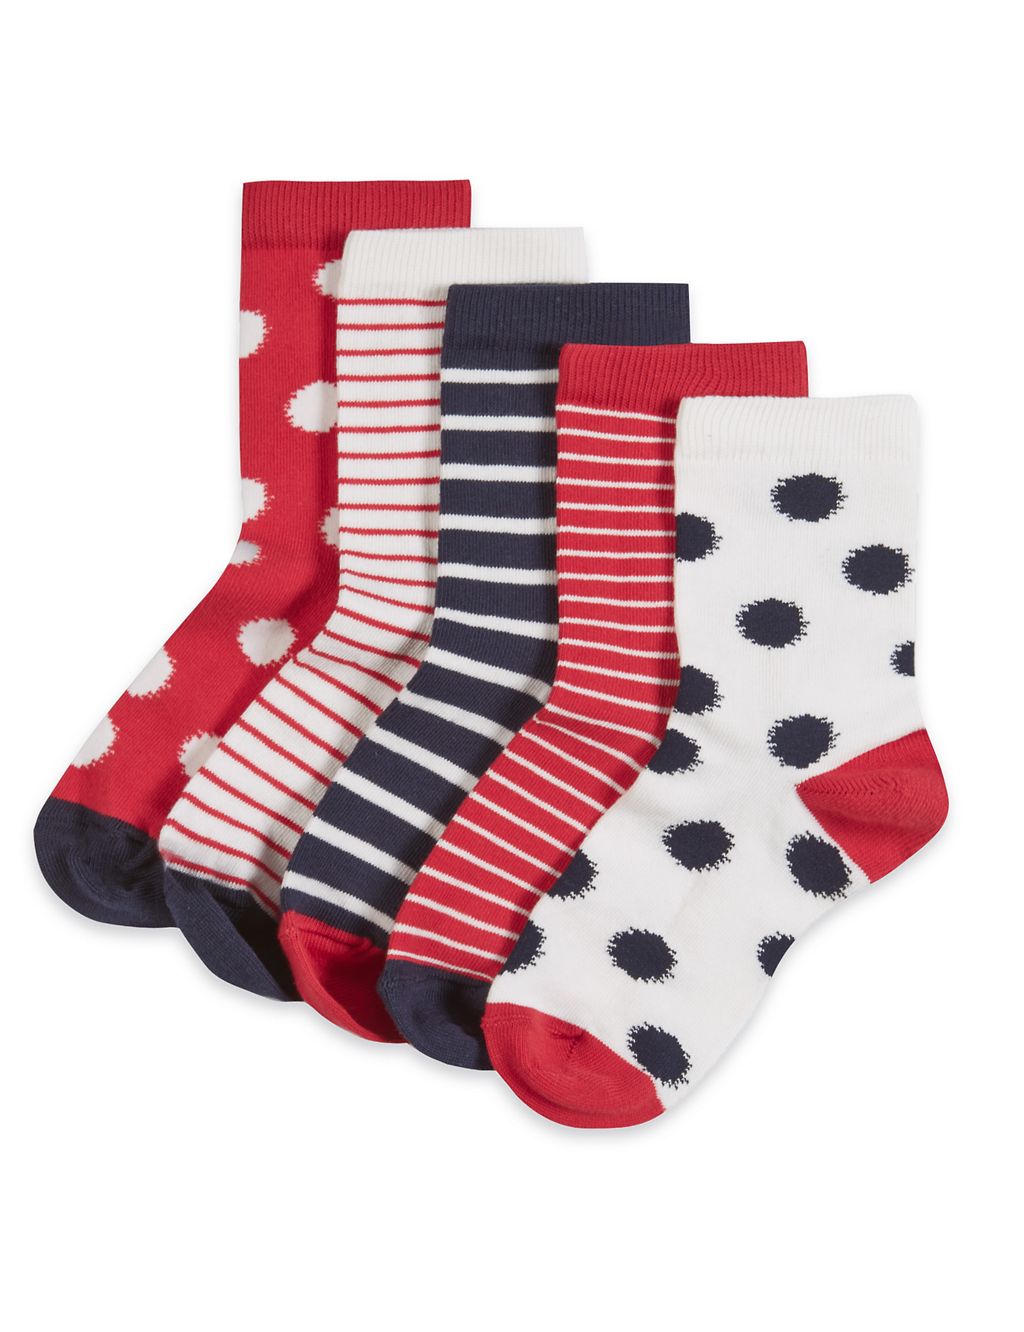 5 Pairs of Freshfeet™ Cotton Rich Spotted & Striped Socks  (5-14 Years) 1 of 1